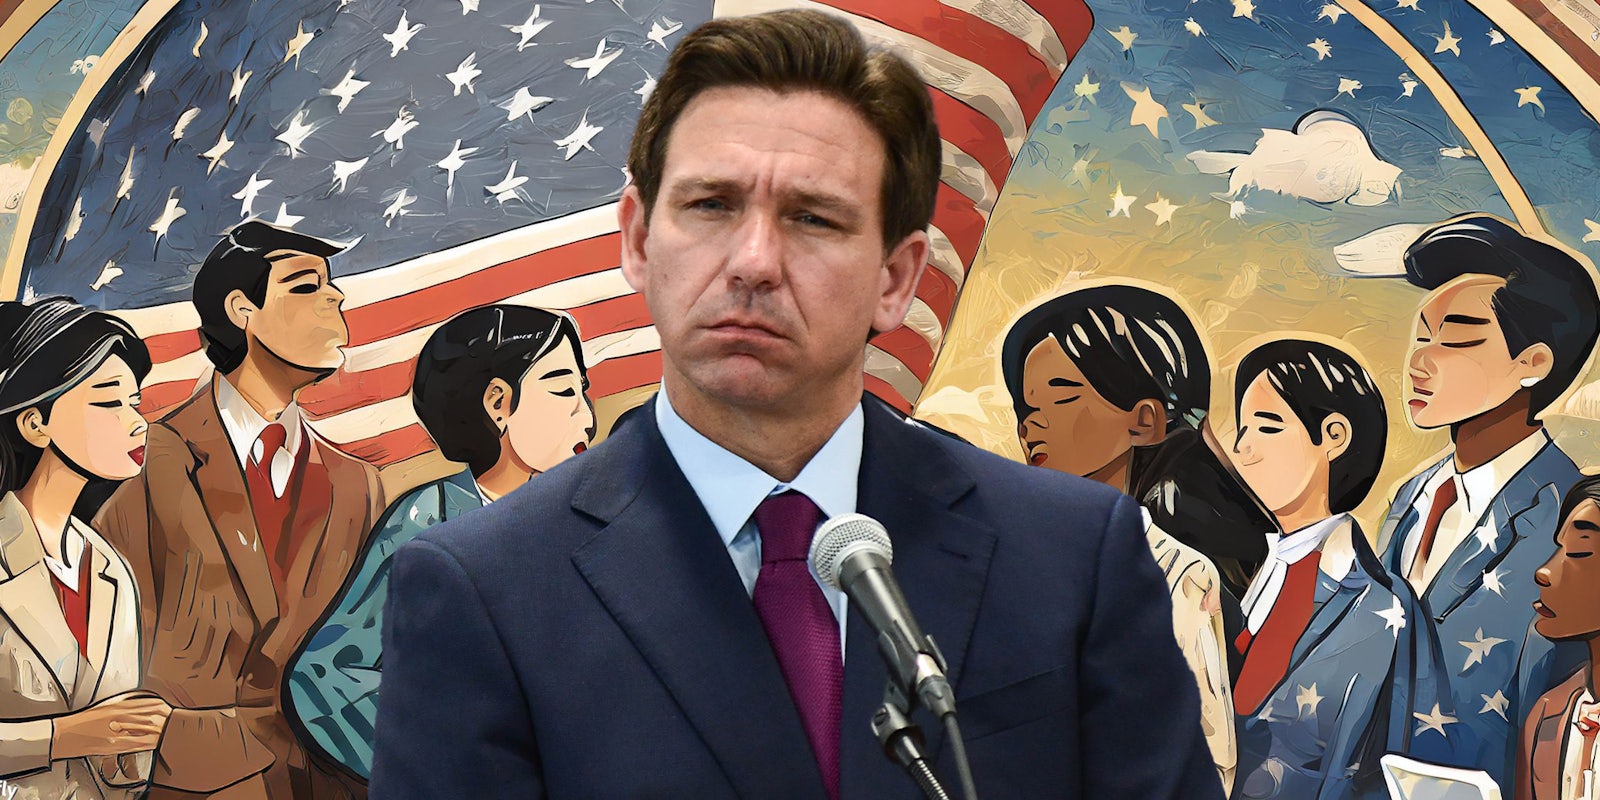 Critics taunt DeSantis for dropping out: 'Should be forced to carry his presidential campaign to term'